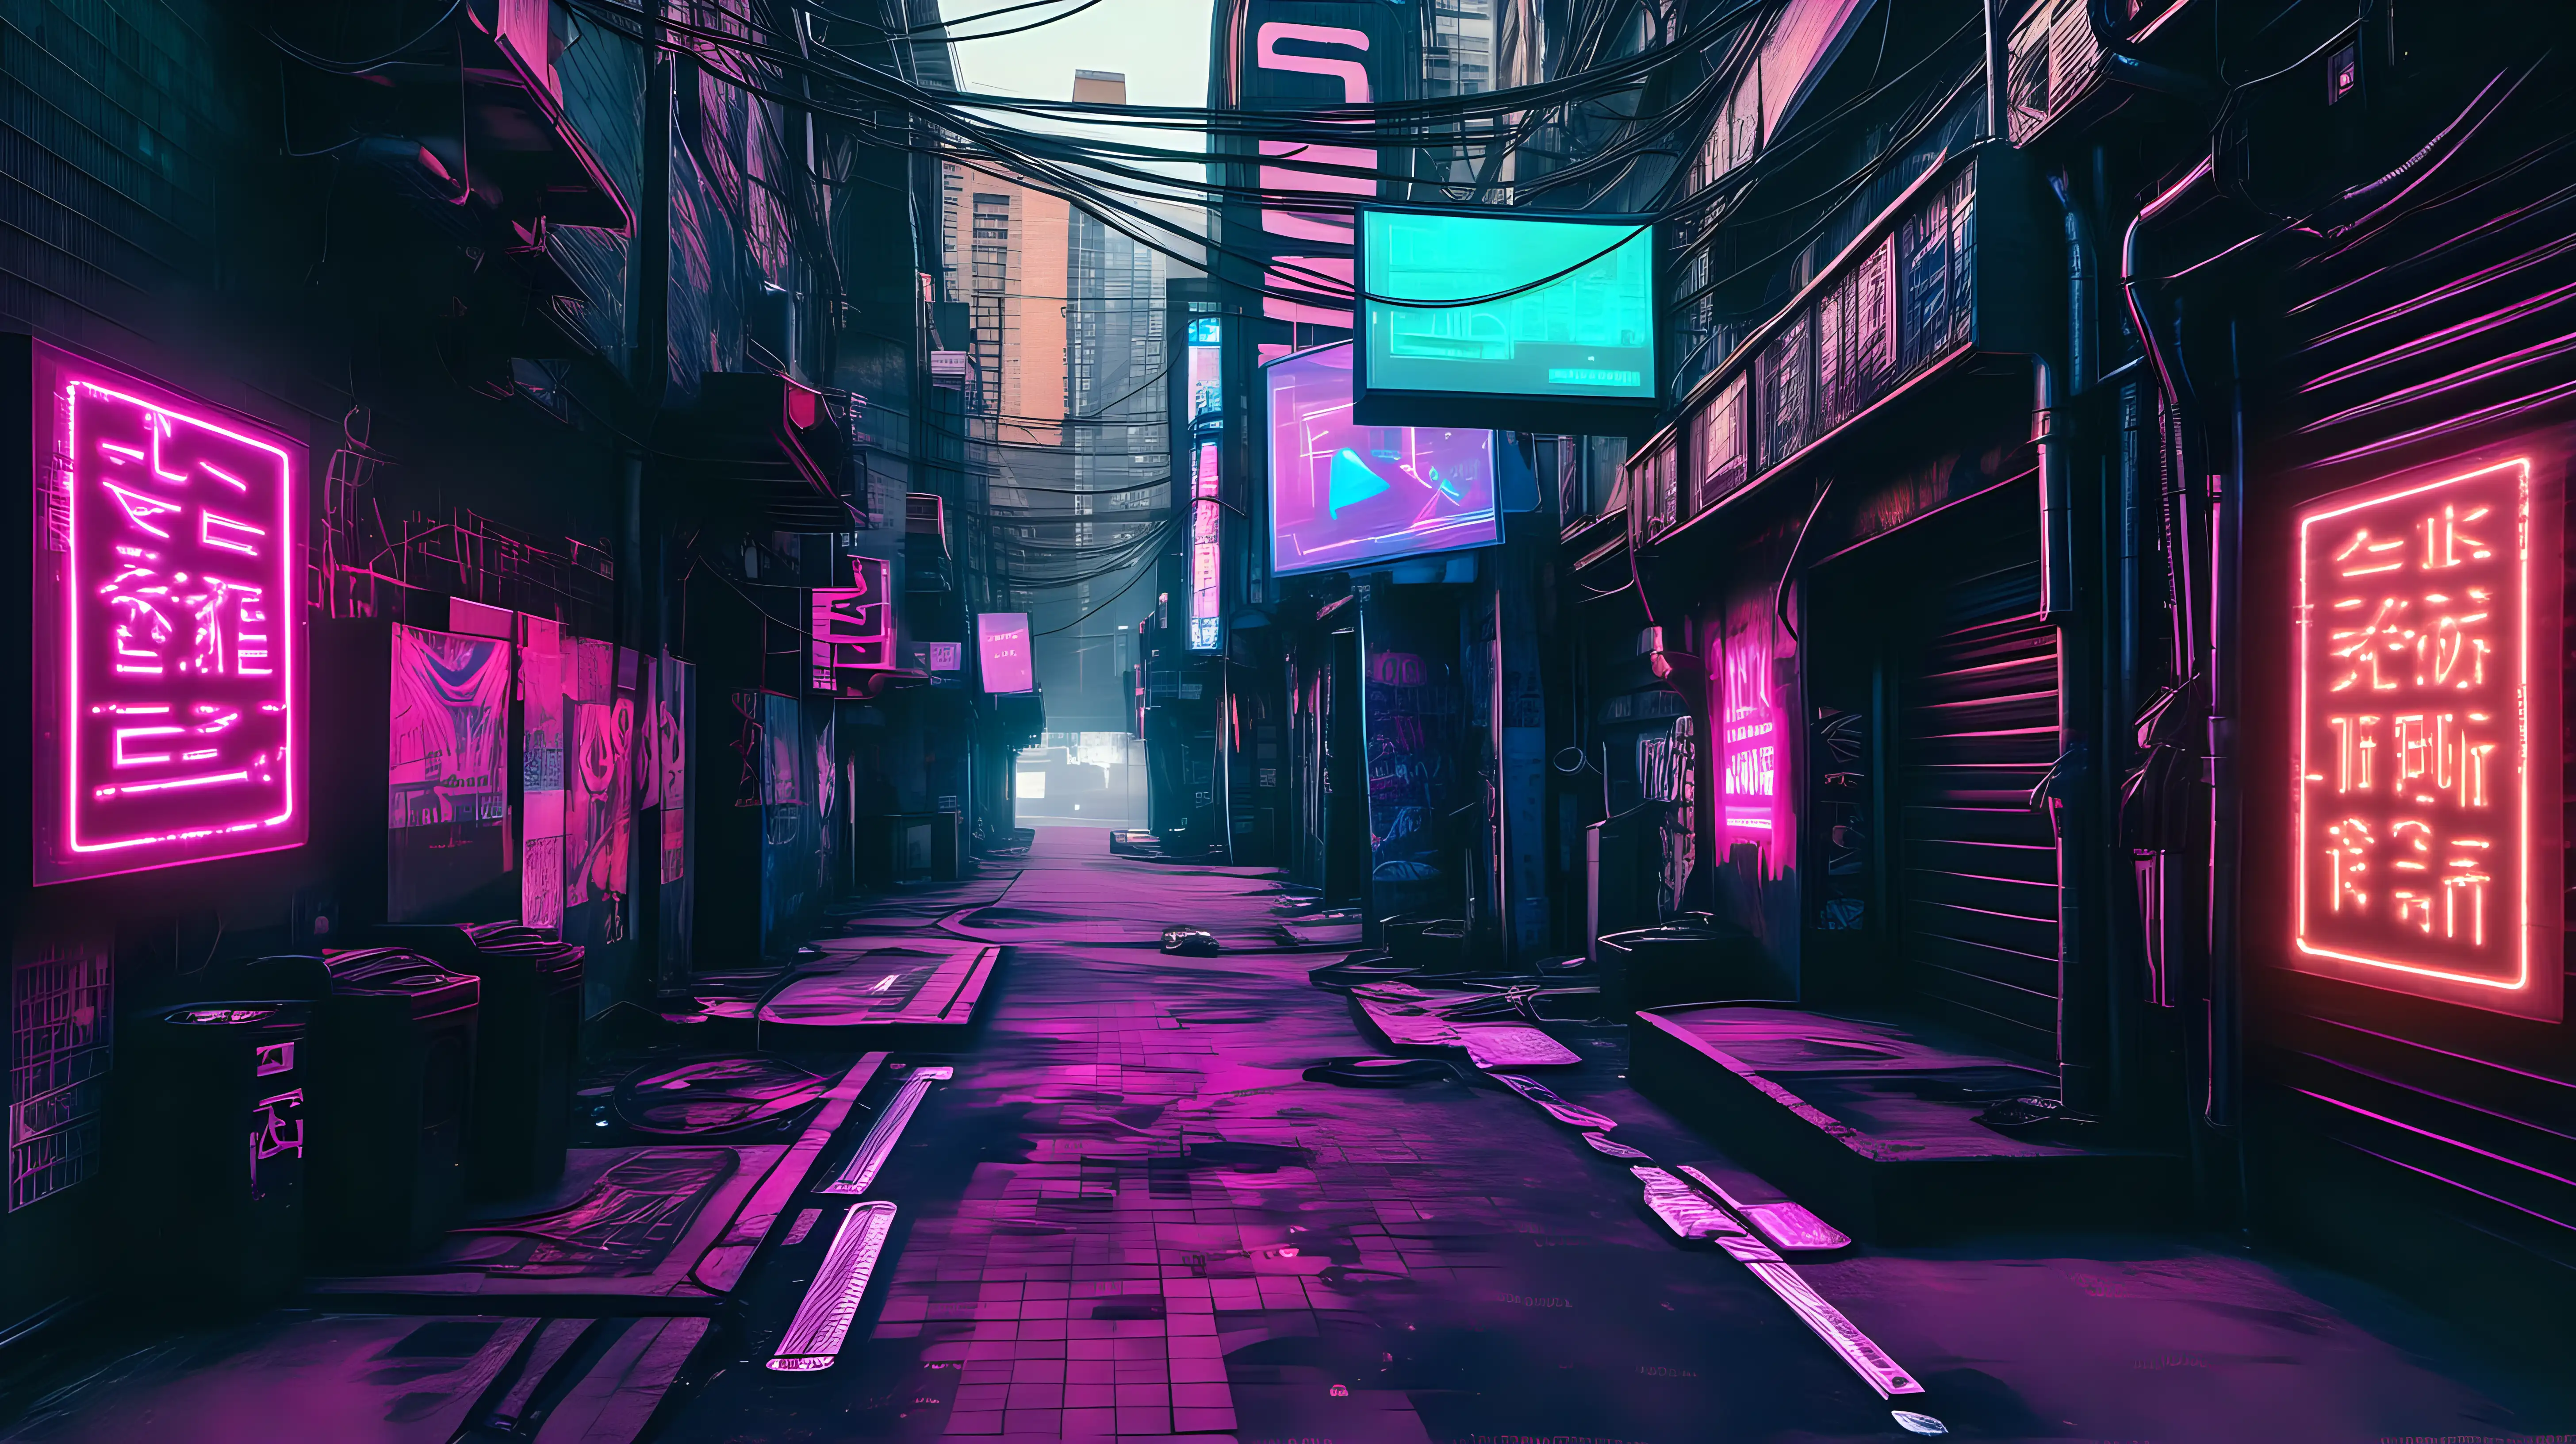 Futuristic Cyberpunk Alleyway with Vibrant Holographic Signs